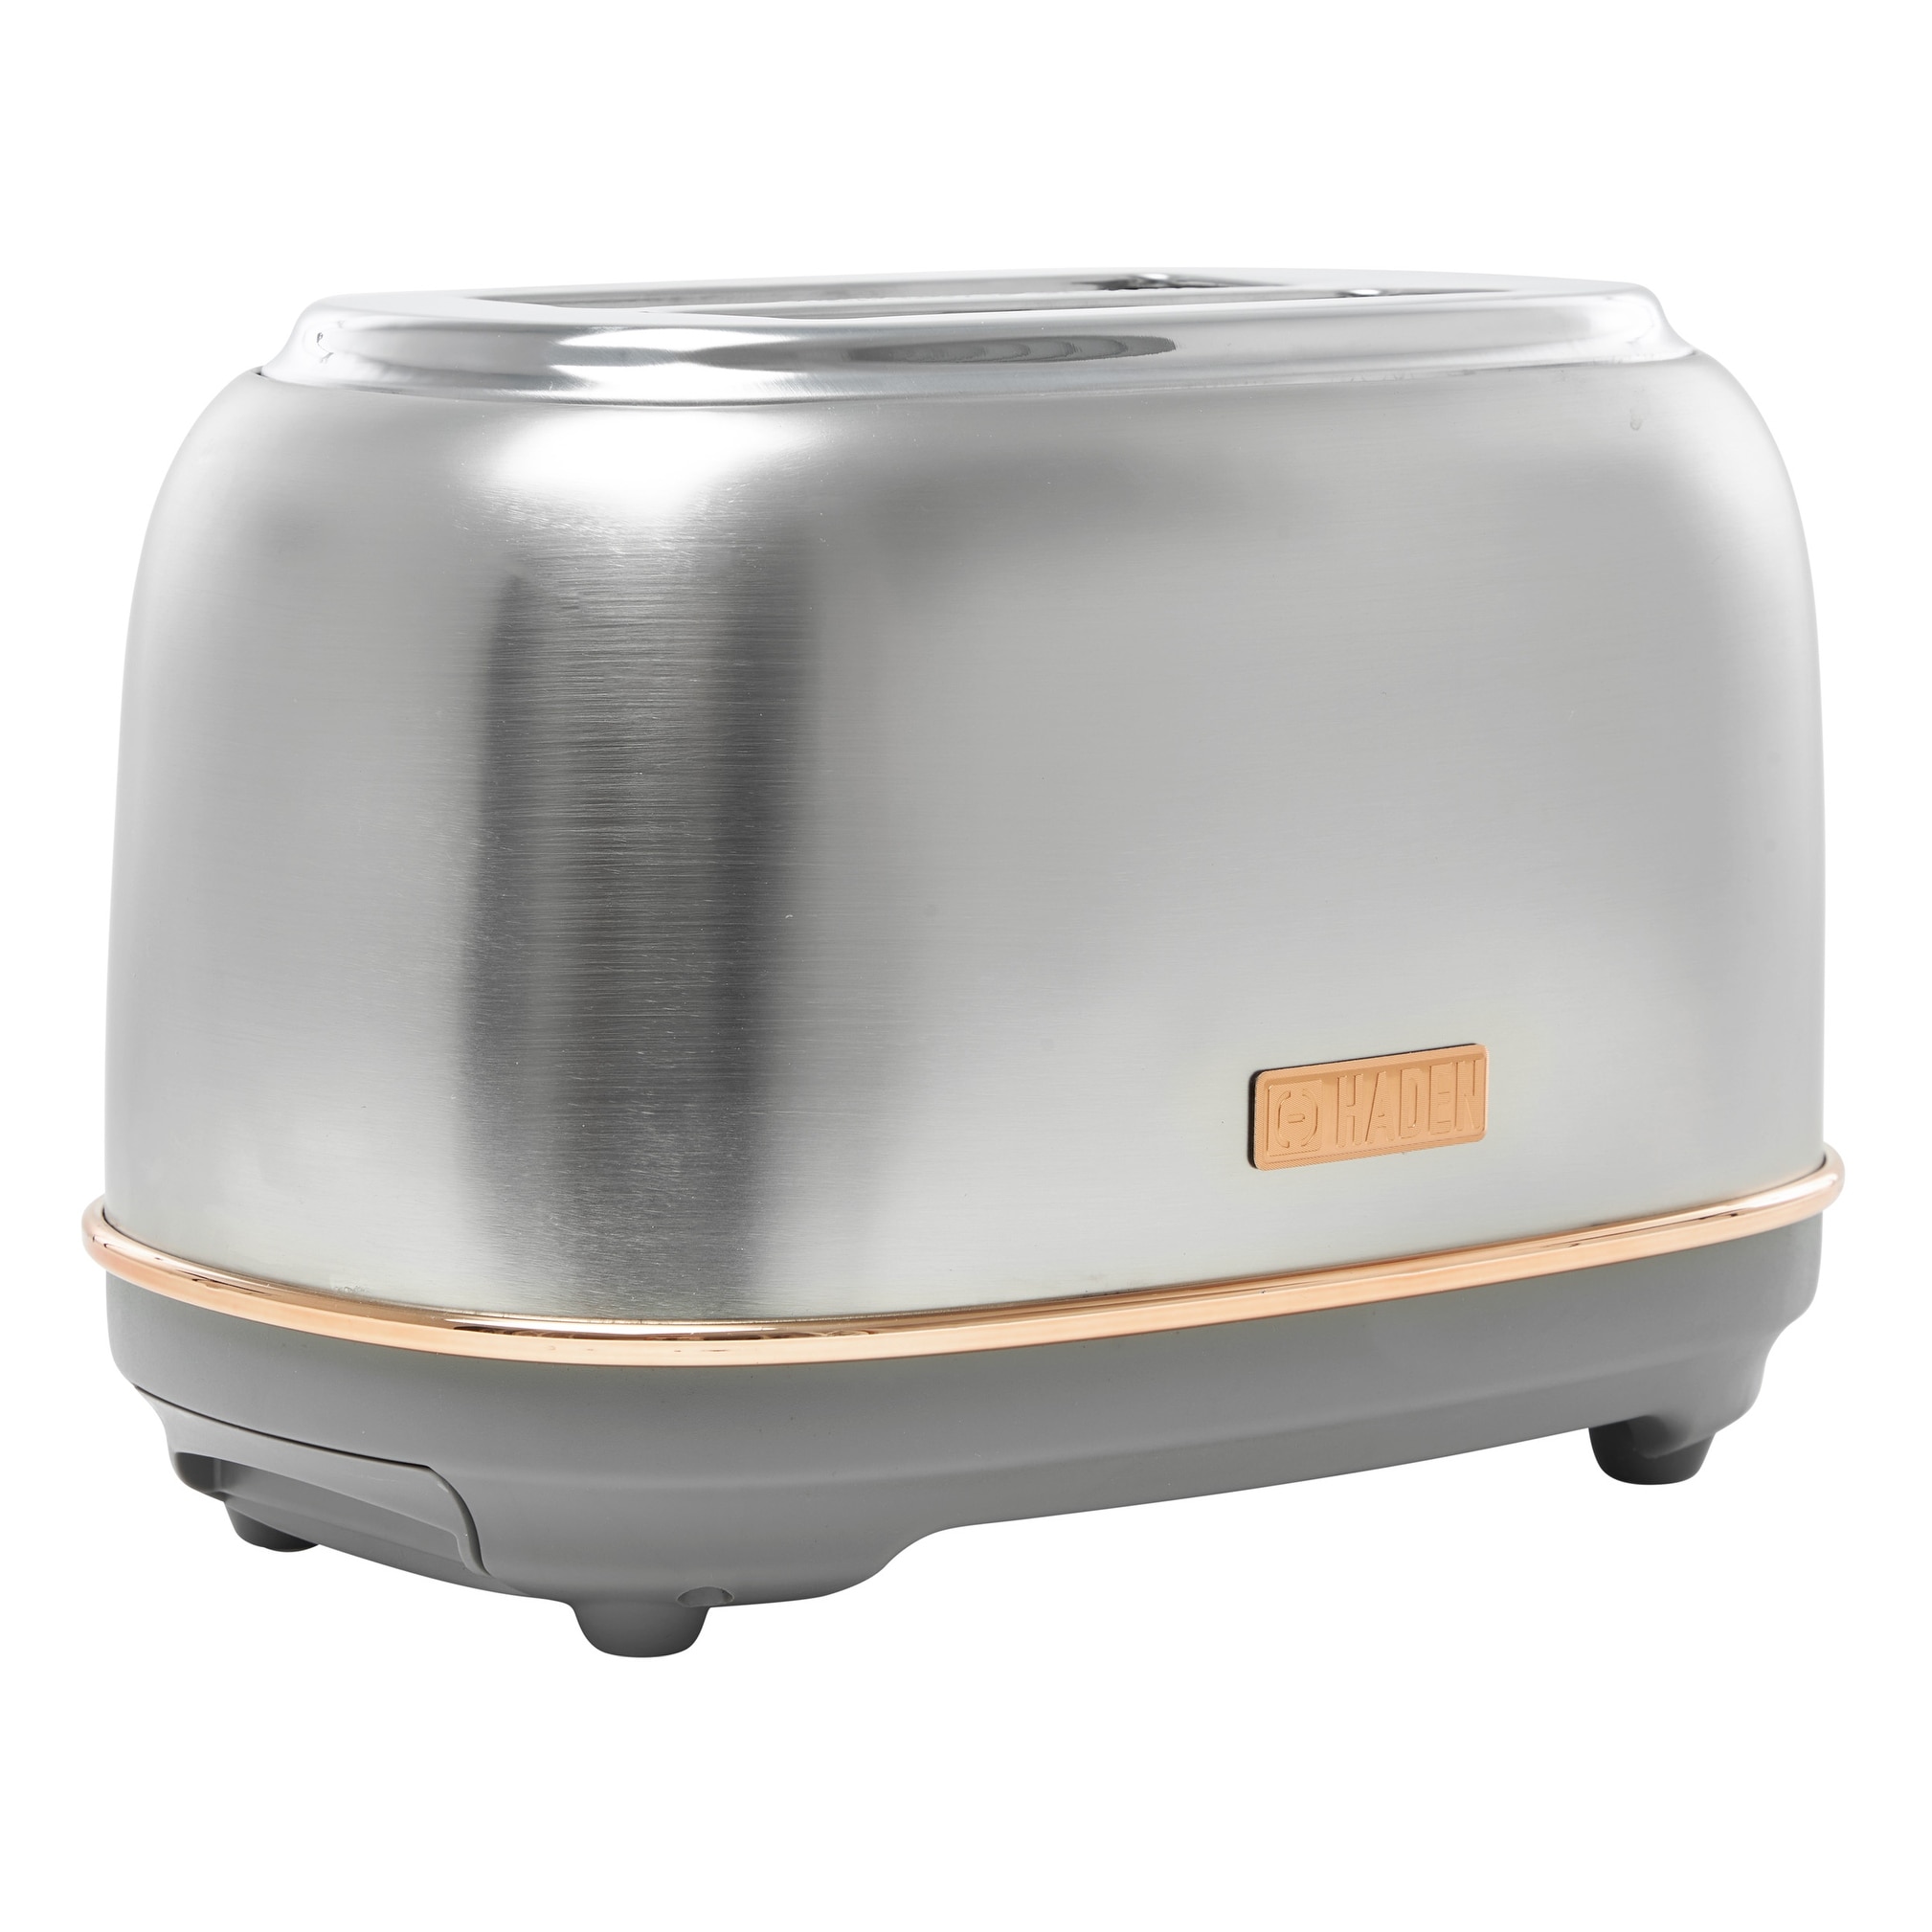 https://ak1.ostkcdn.com/images/products/is/images/direct/3576d71dbdb5100ff2103e5ea332ed0778f7e892/Haden-Heritage-Stainless-Steel-2-Slice-Toaster.jpg